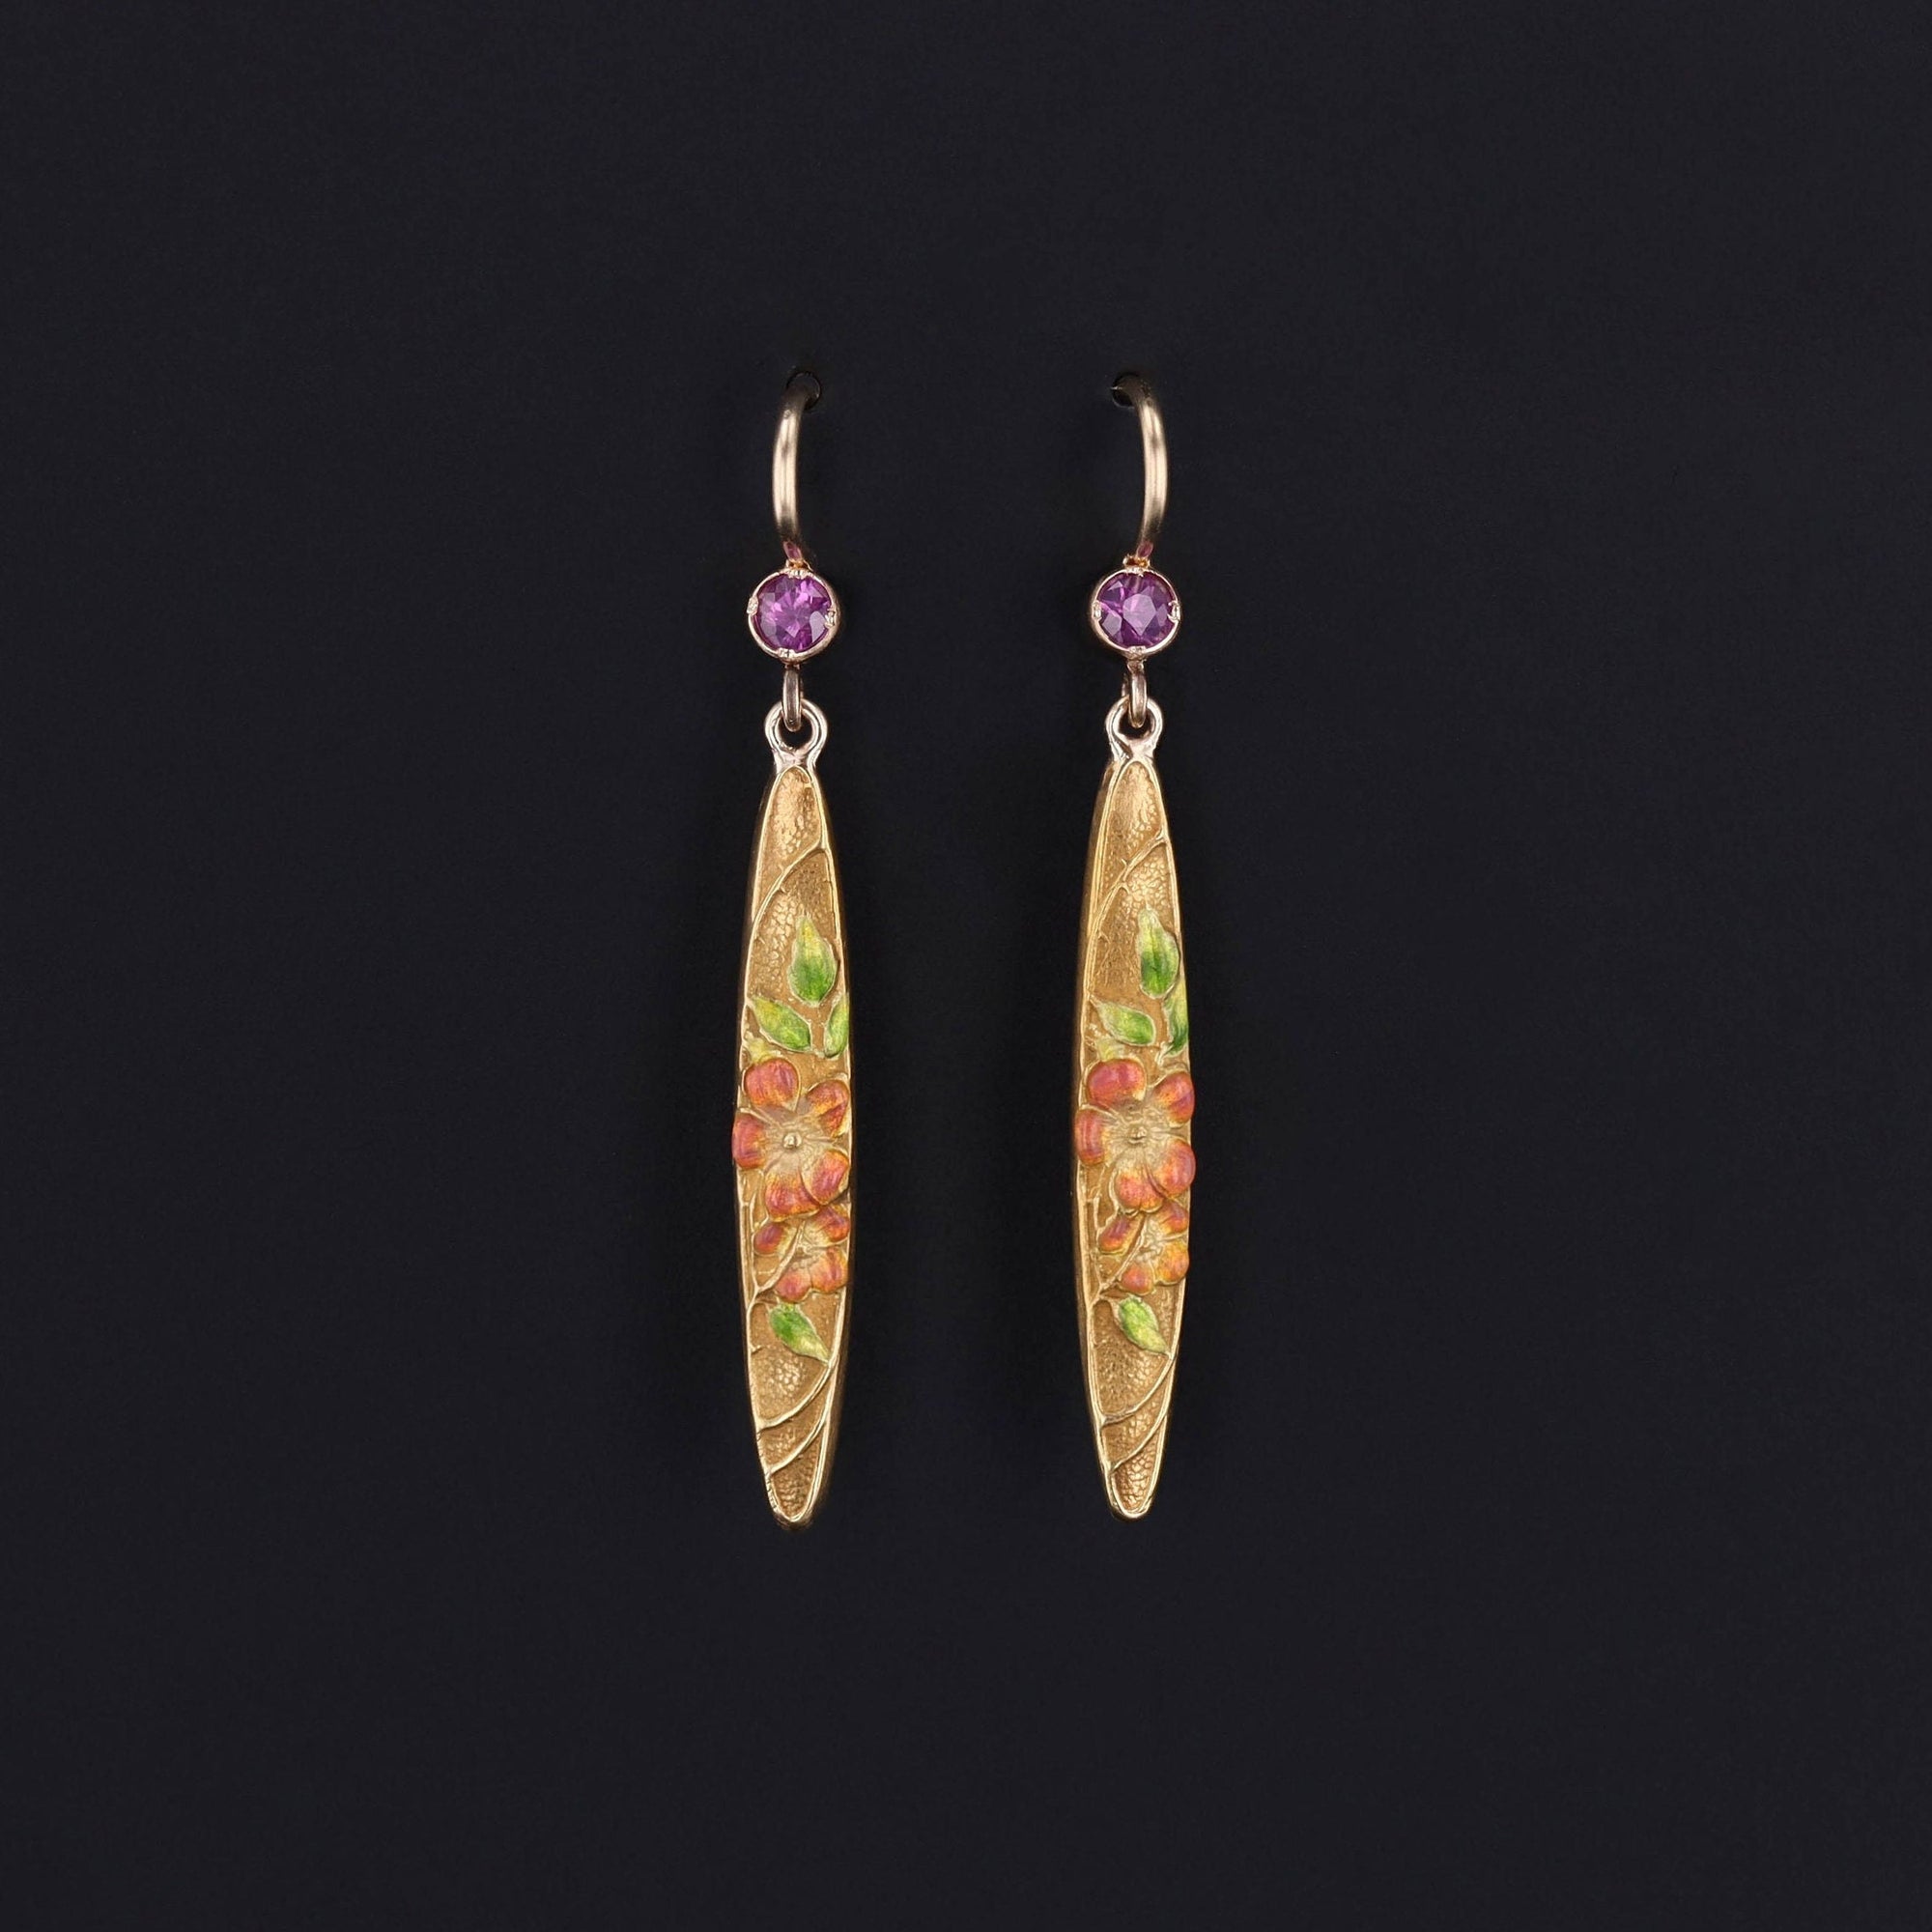 Antique Enamel and Pink Sapphire Conversion Earrings of 14k Gold